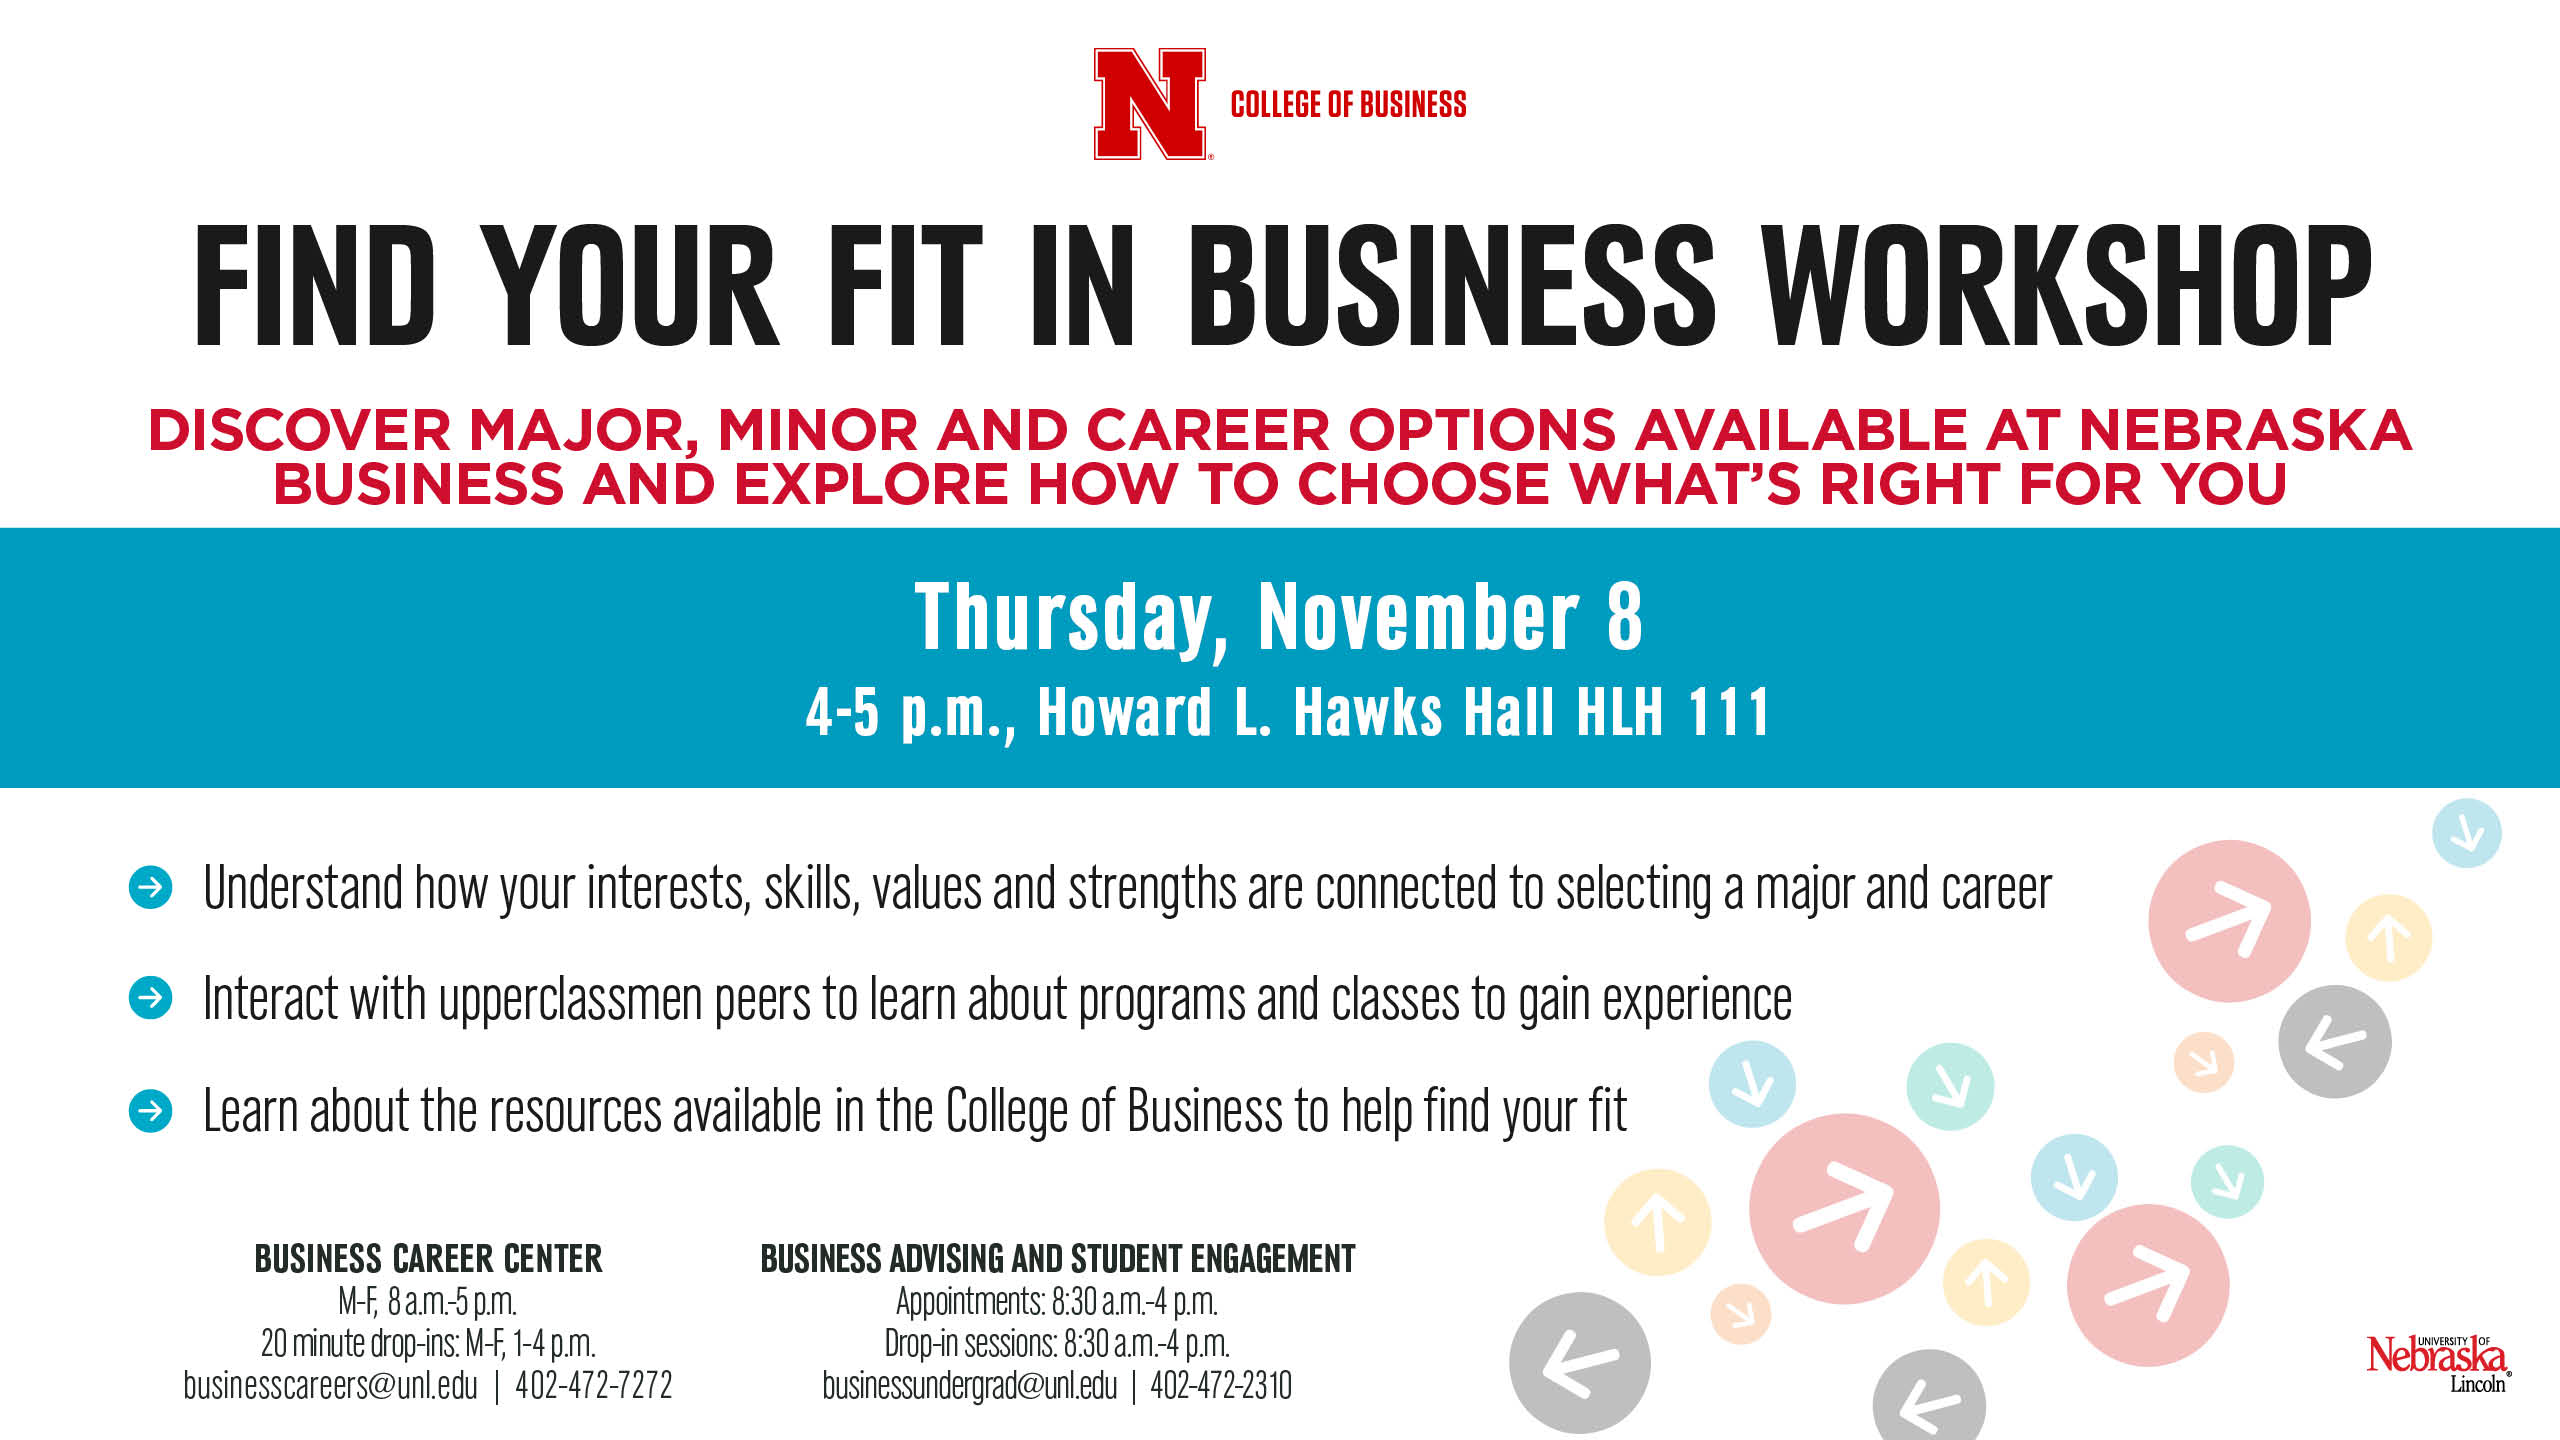 Find Your Fit in Business Workshop